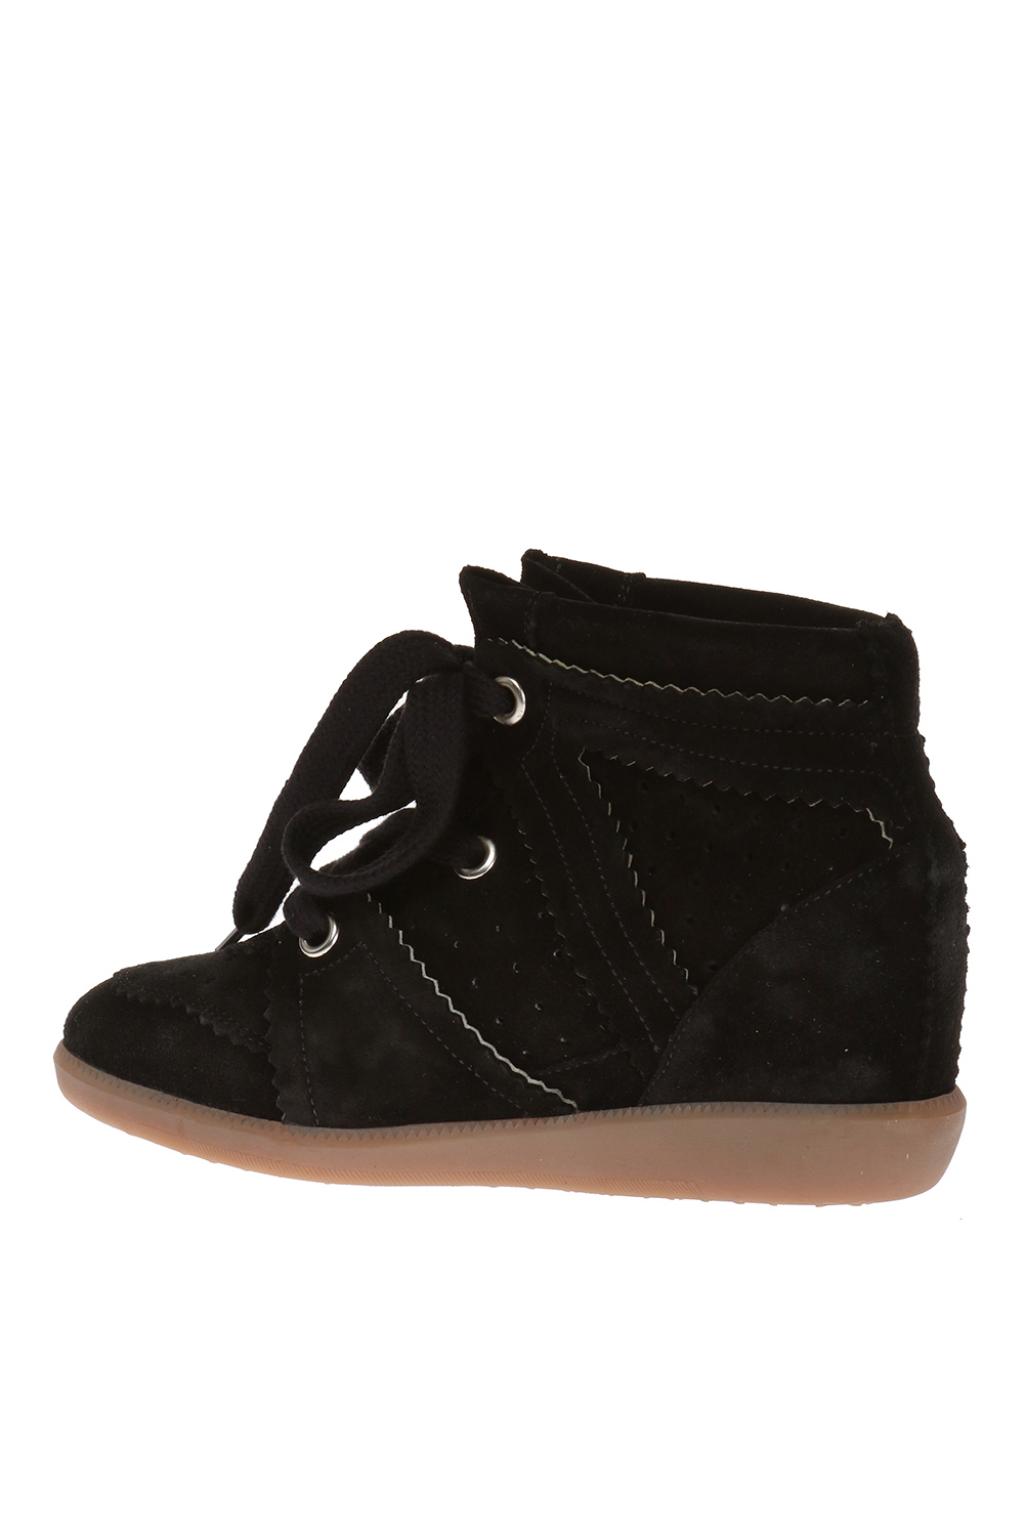 Isabel Marant 'Bobby' suede sneakers